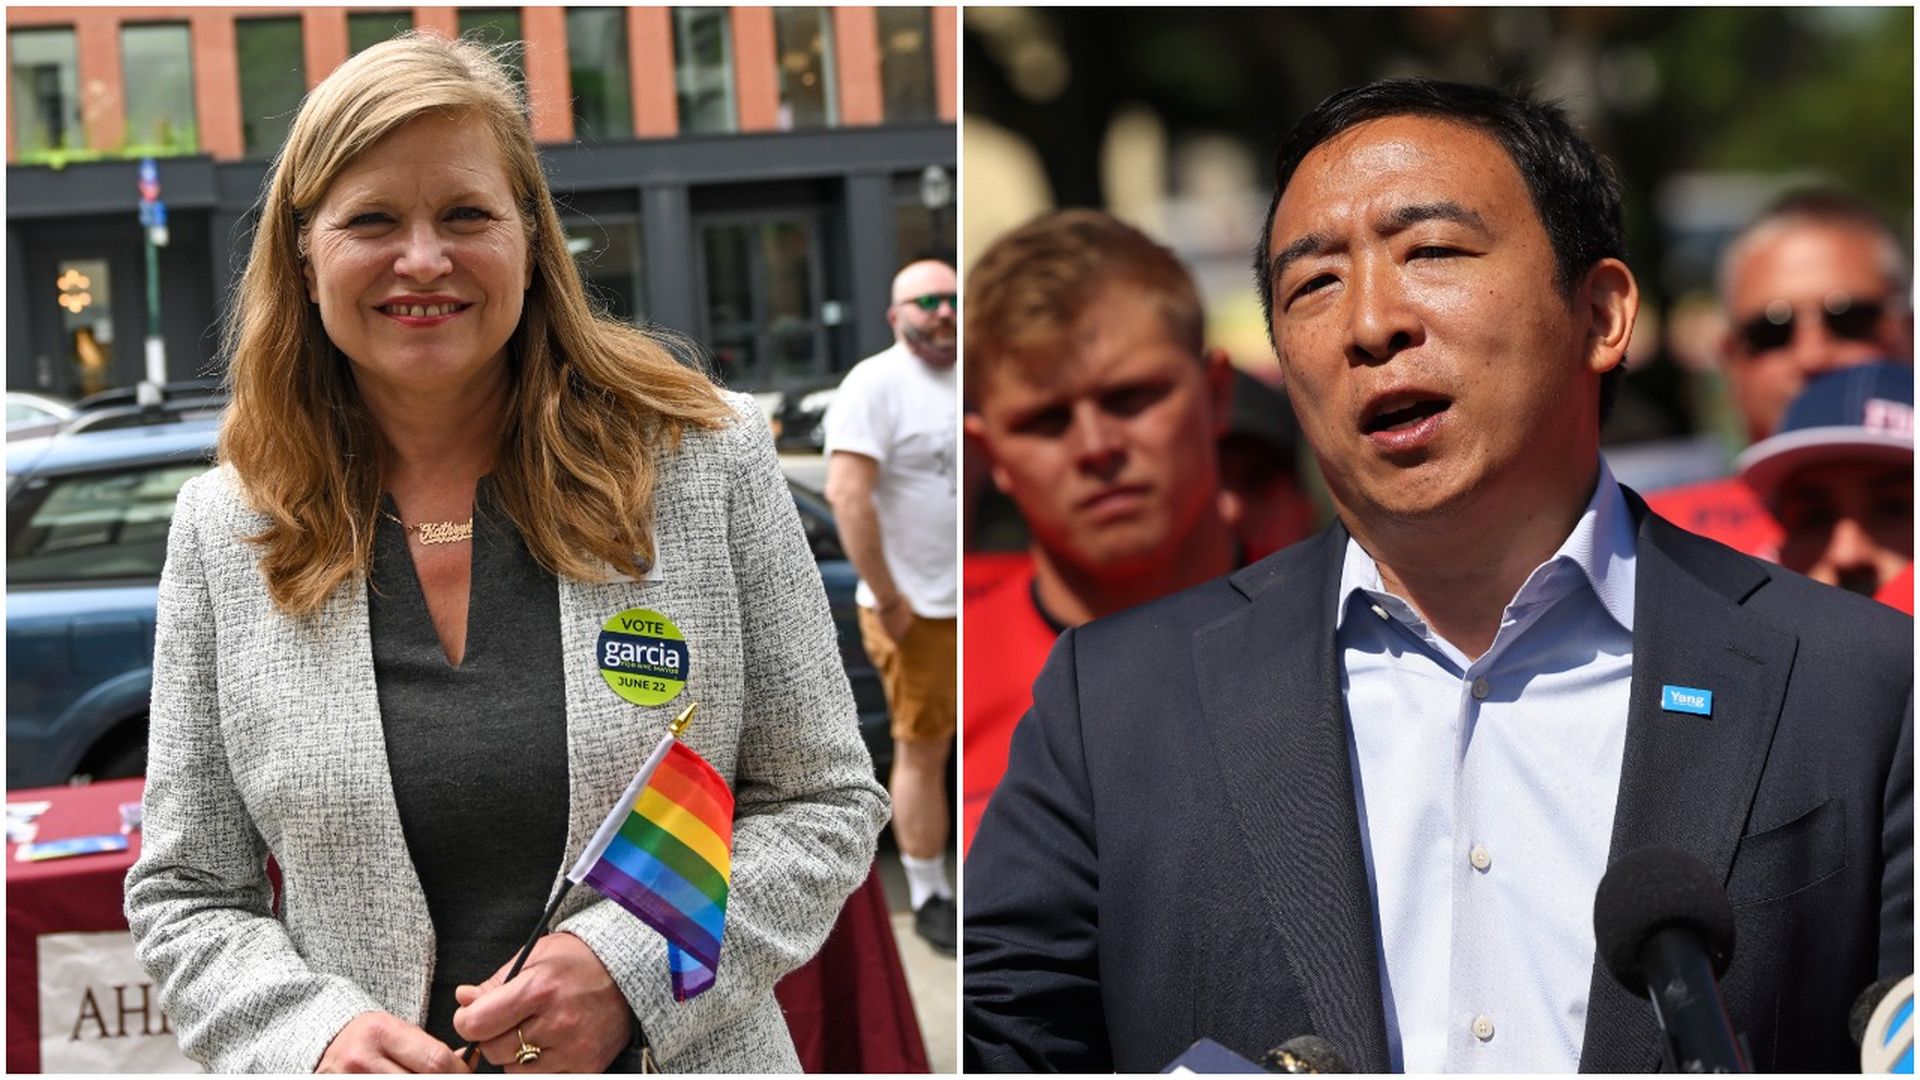  Combination images of New York City mayoral candidates Kathryn Garcia and Andrew Yang out campaigning